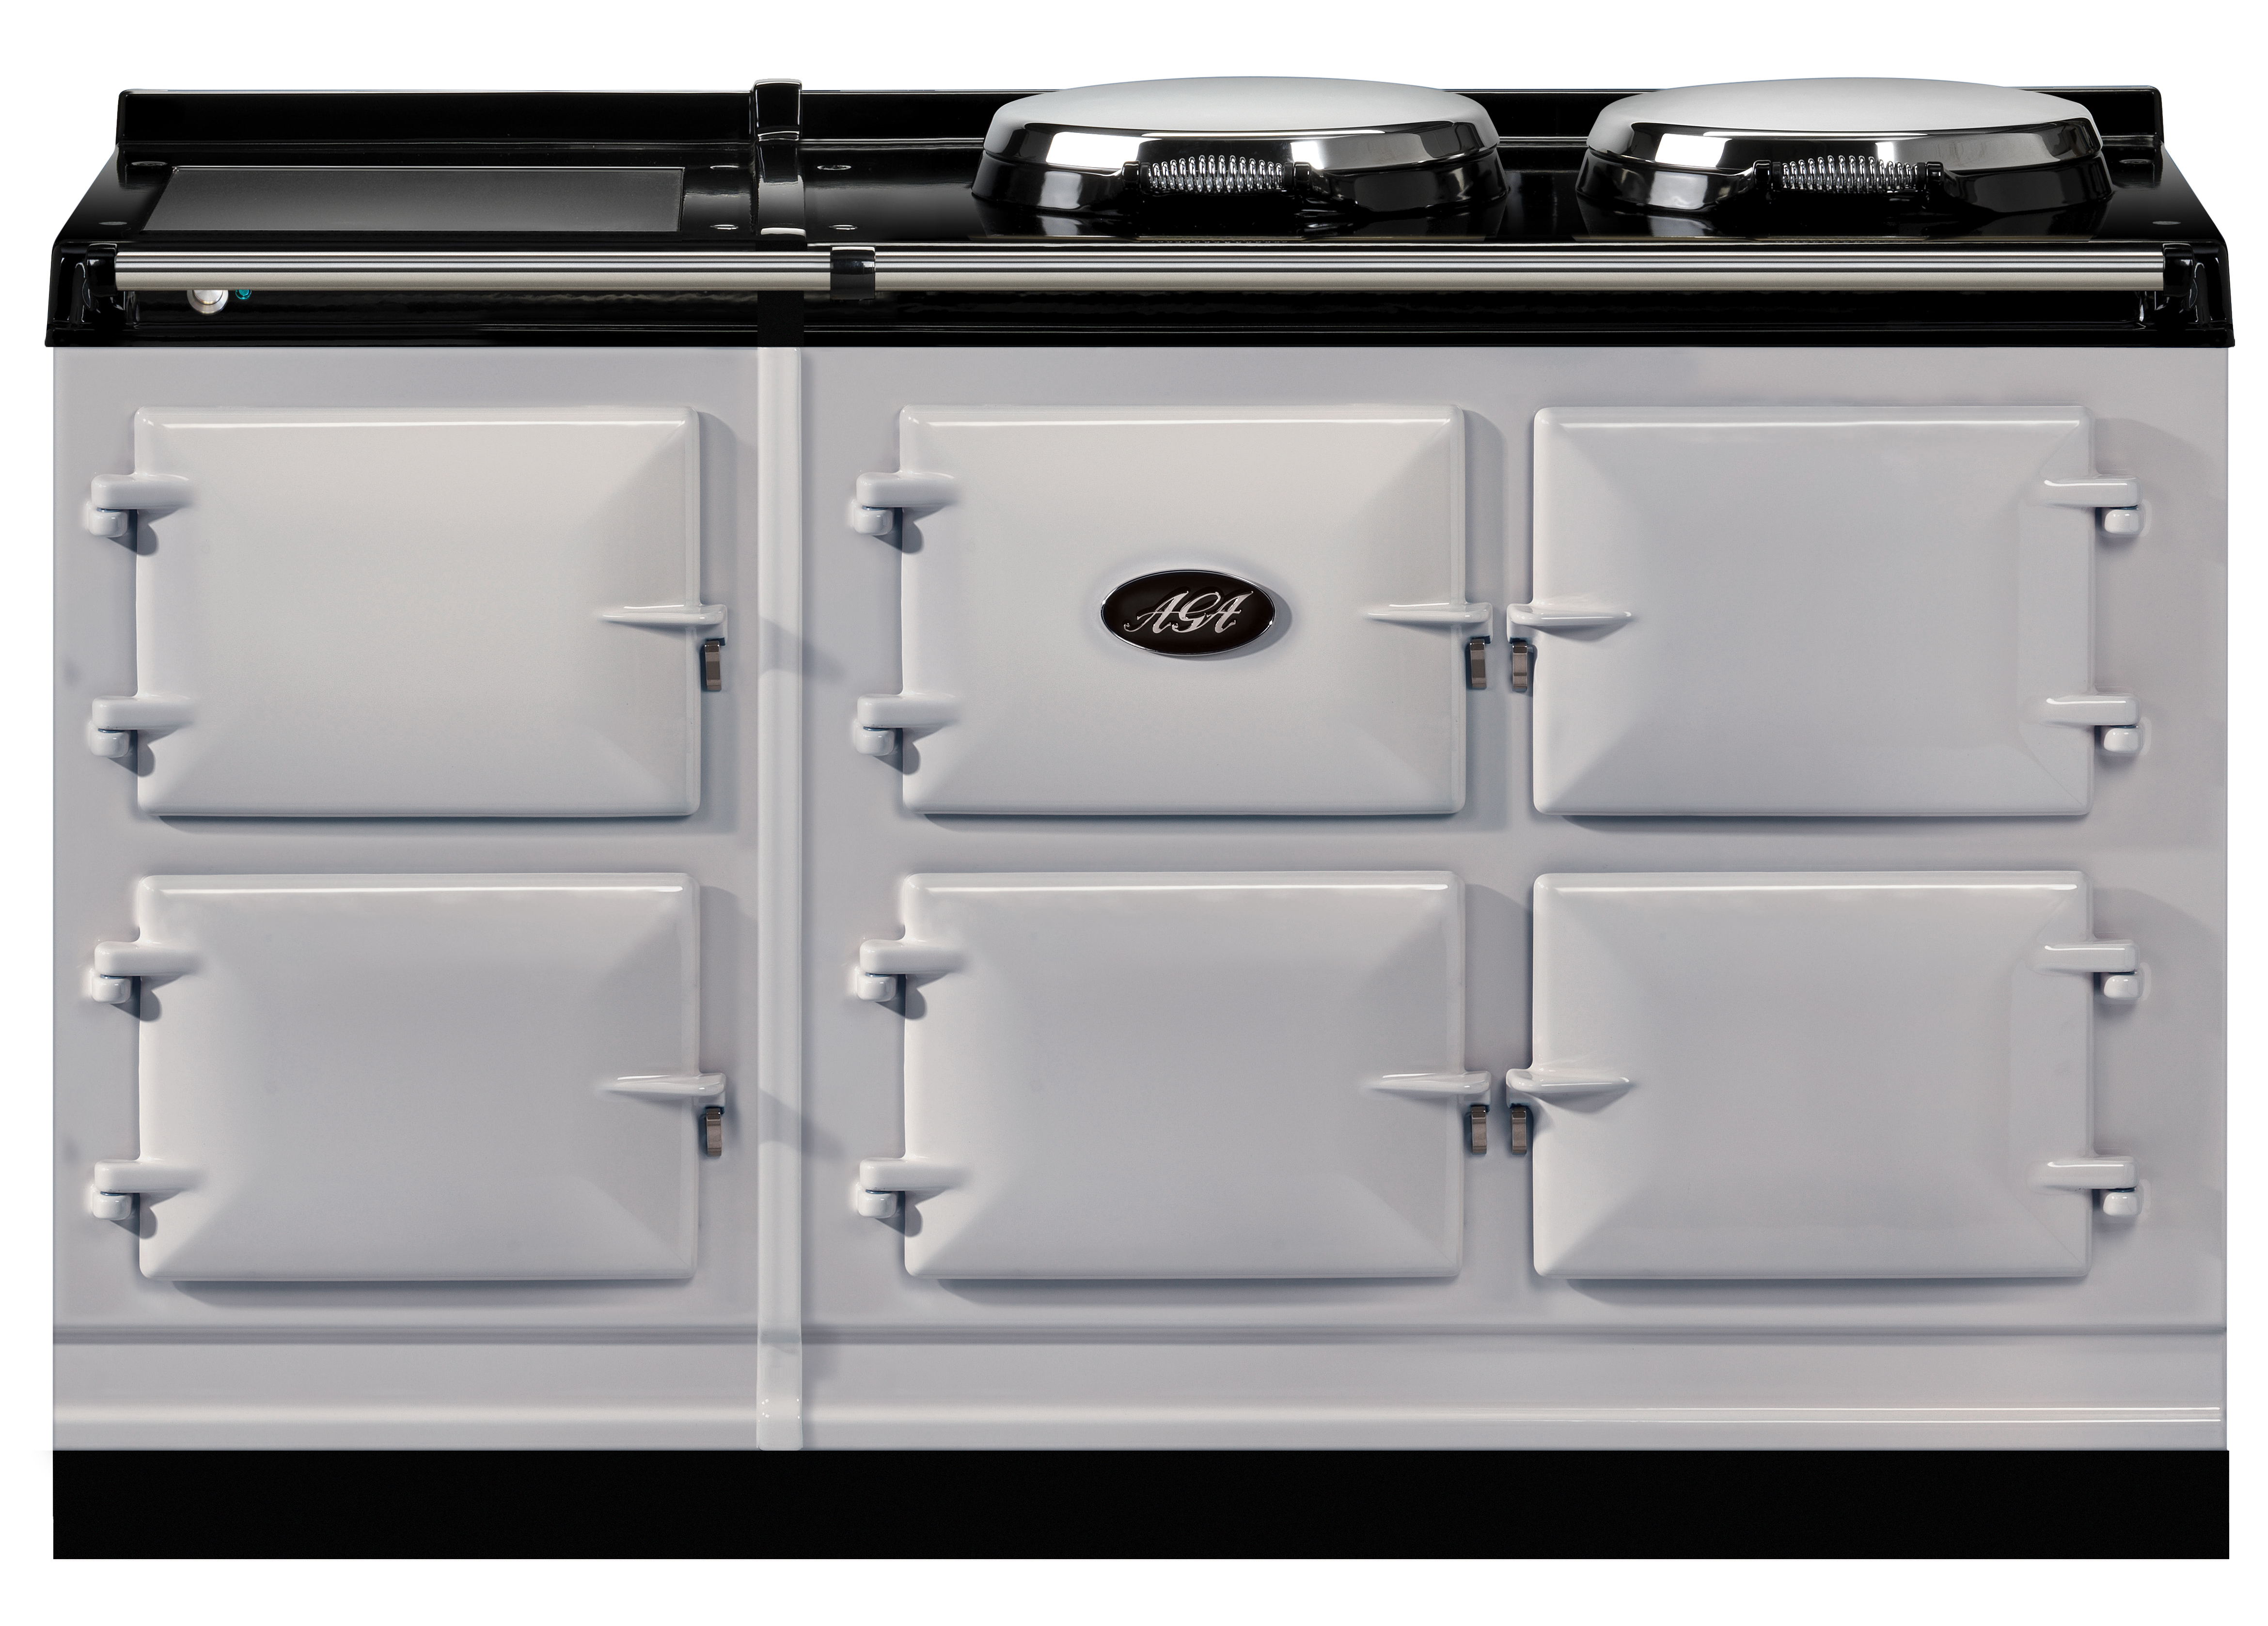 The Aga way of living